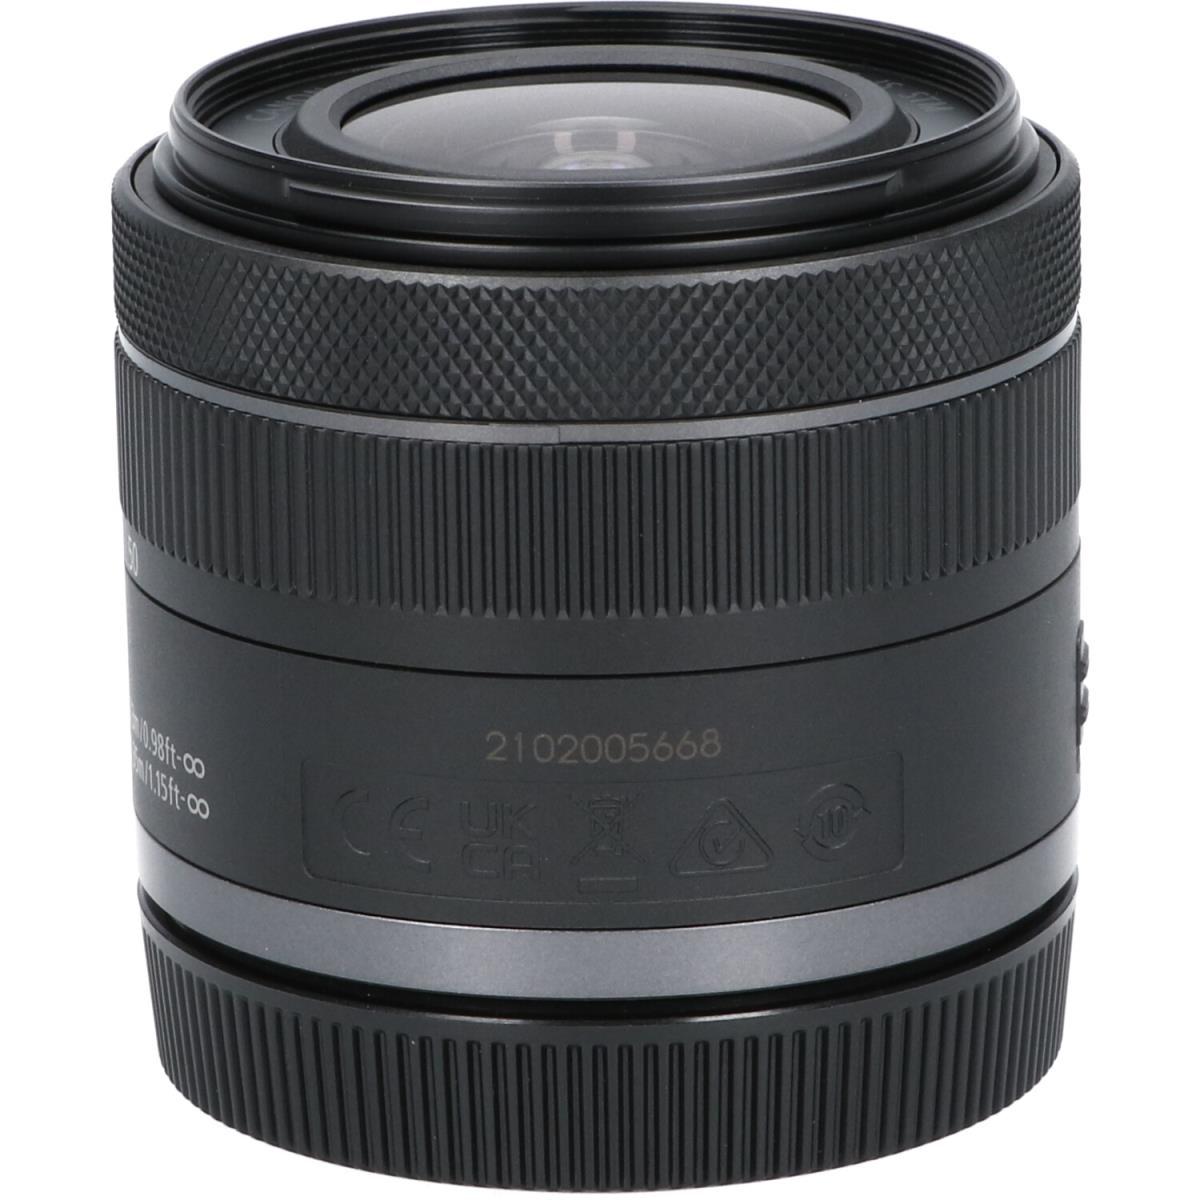 CANON RF24-50mm F4.5-6.3 IS STM